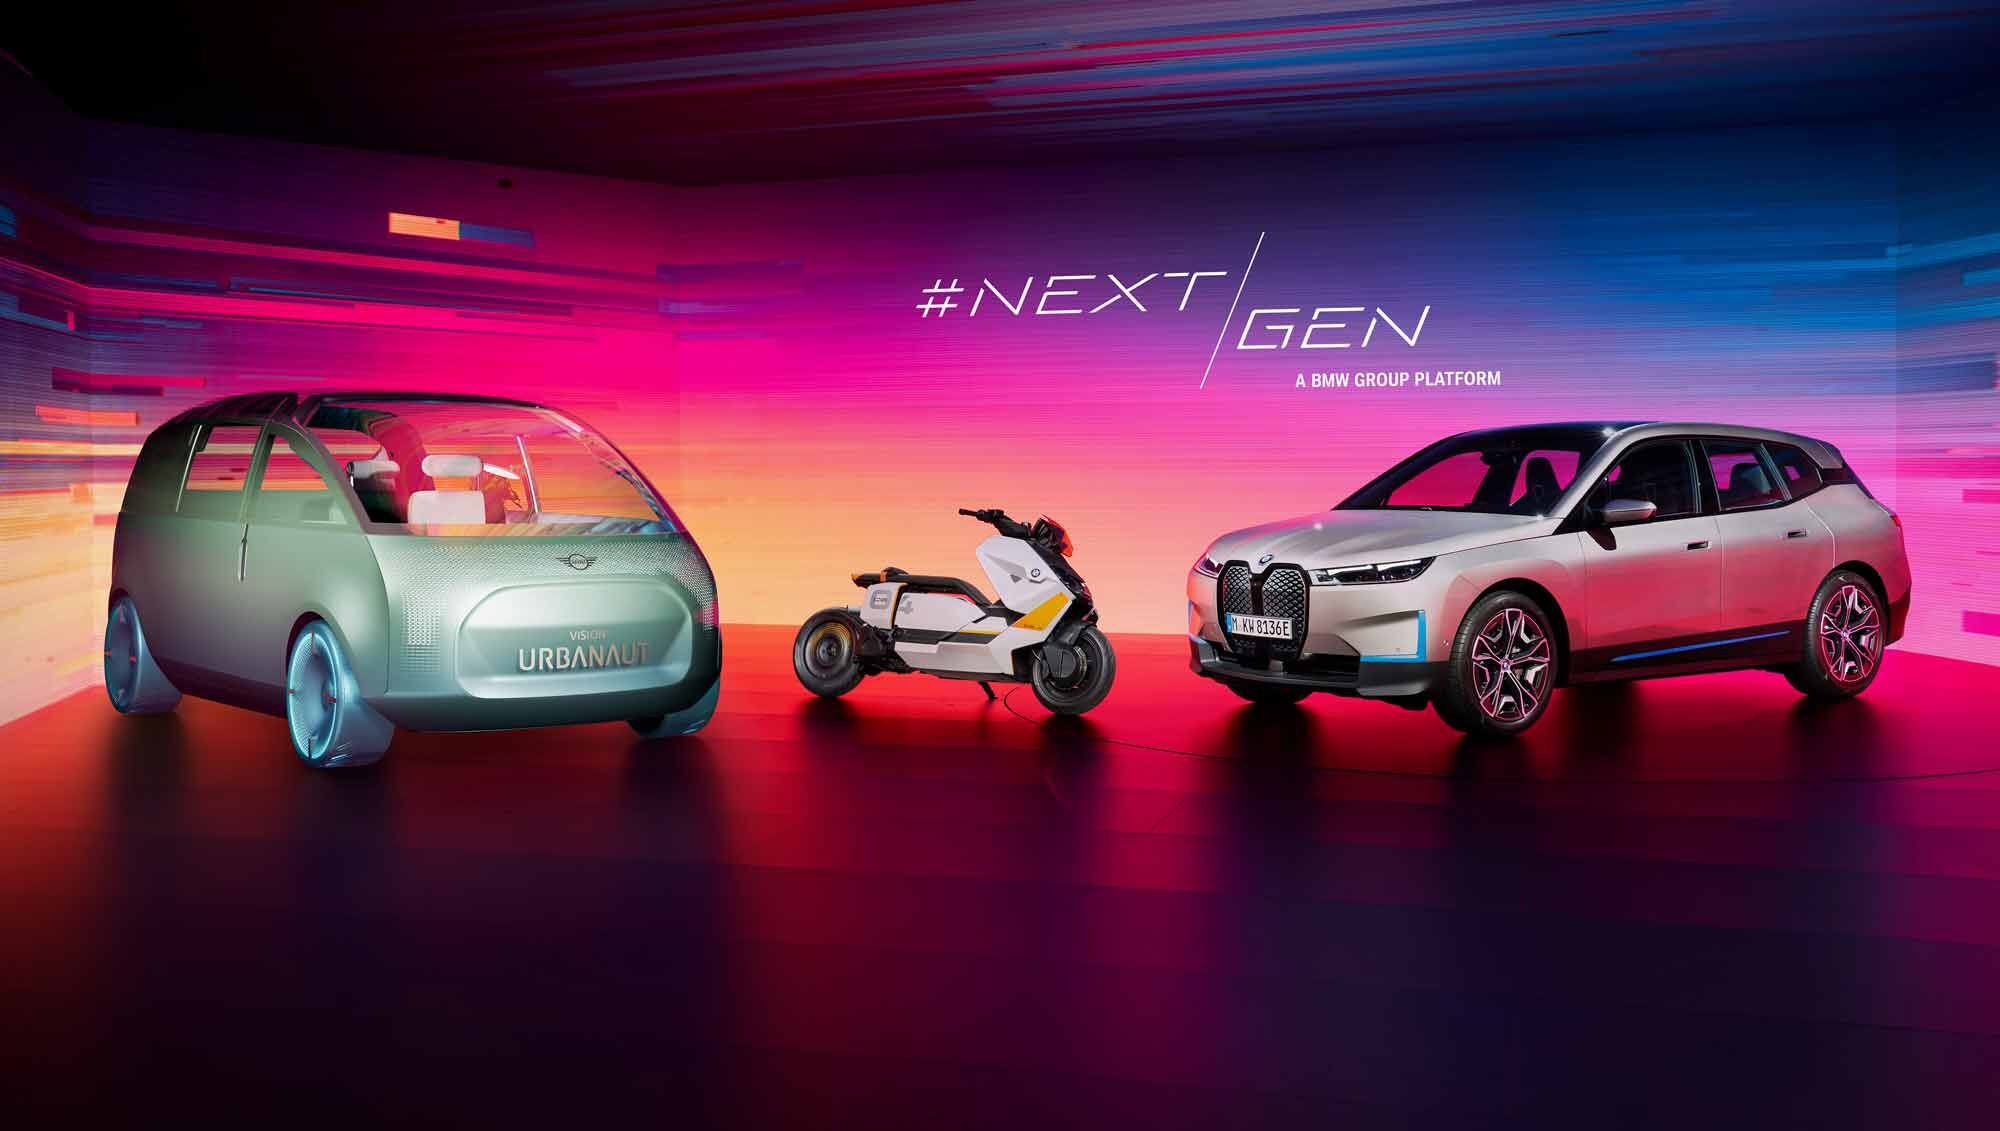 The Definition CE 04 was the only two-wheeled BMW in the #NEXTgen 2020 presentation.